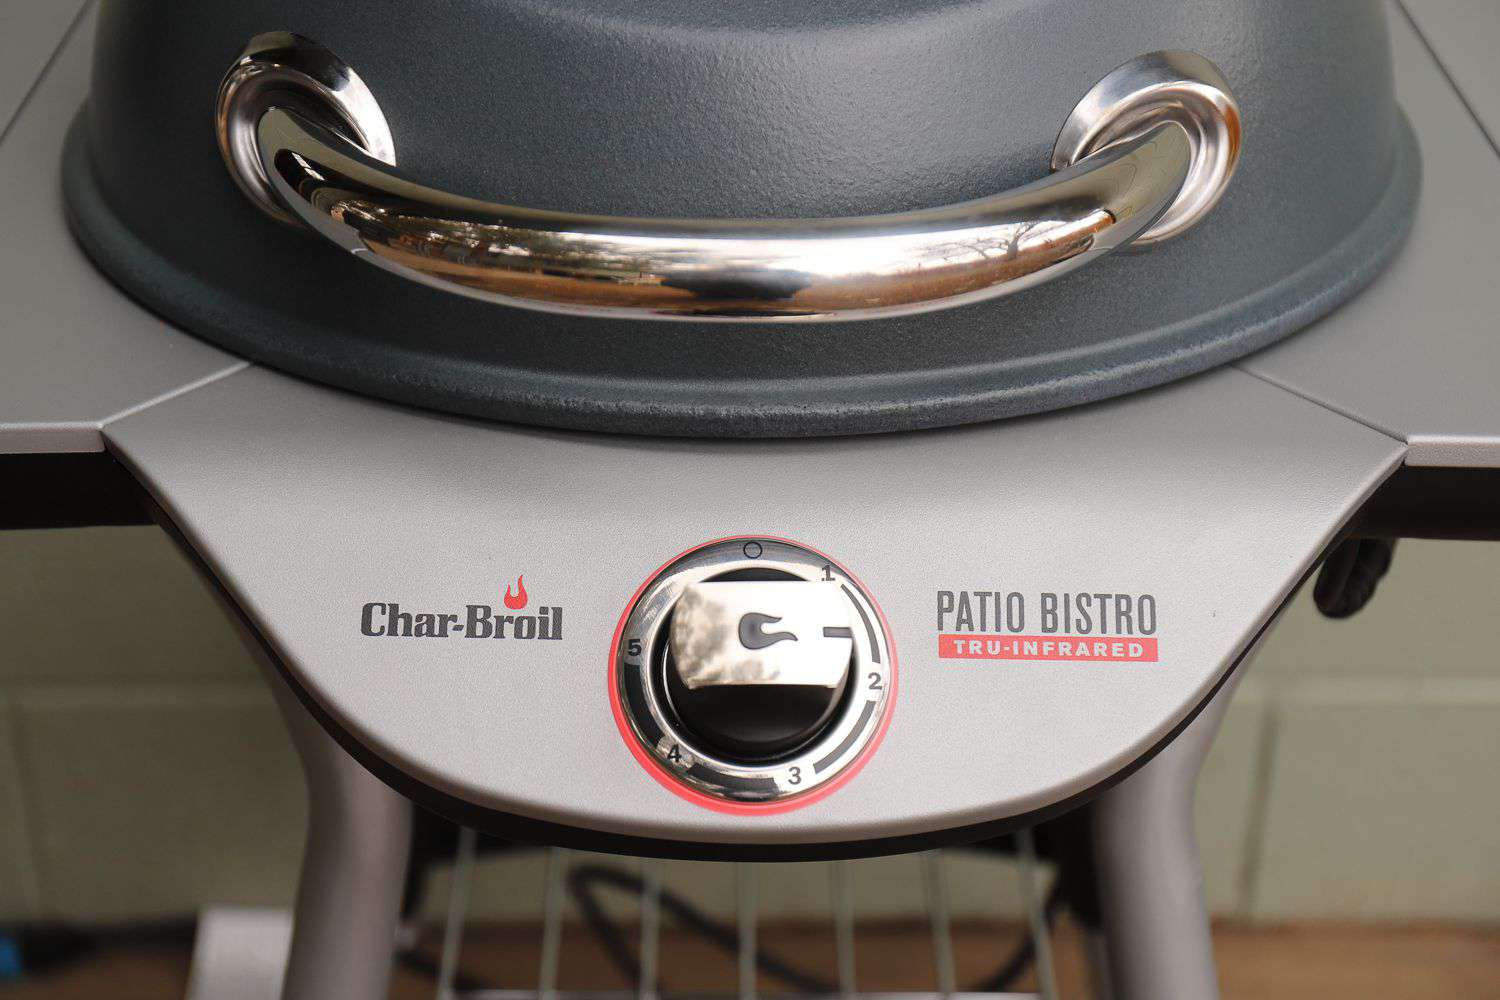 Char-Broil 240 Patio Bistro Electric Grill